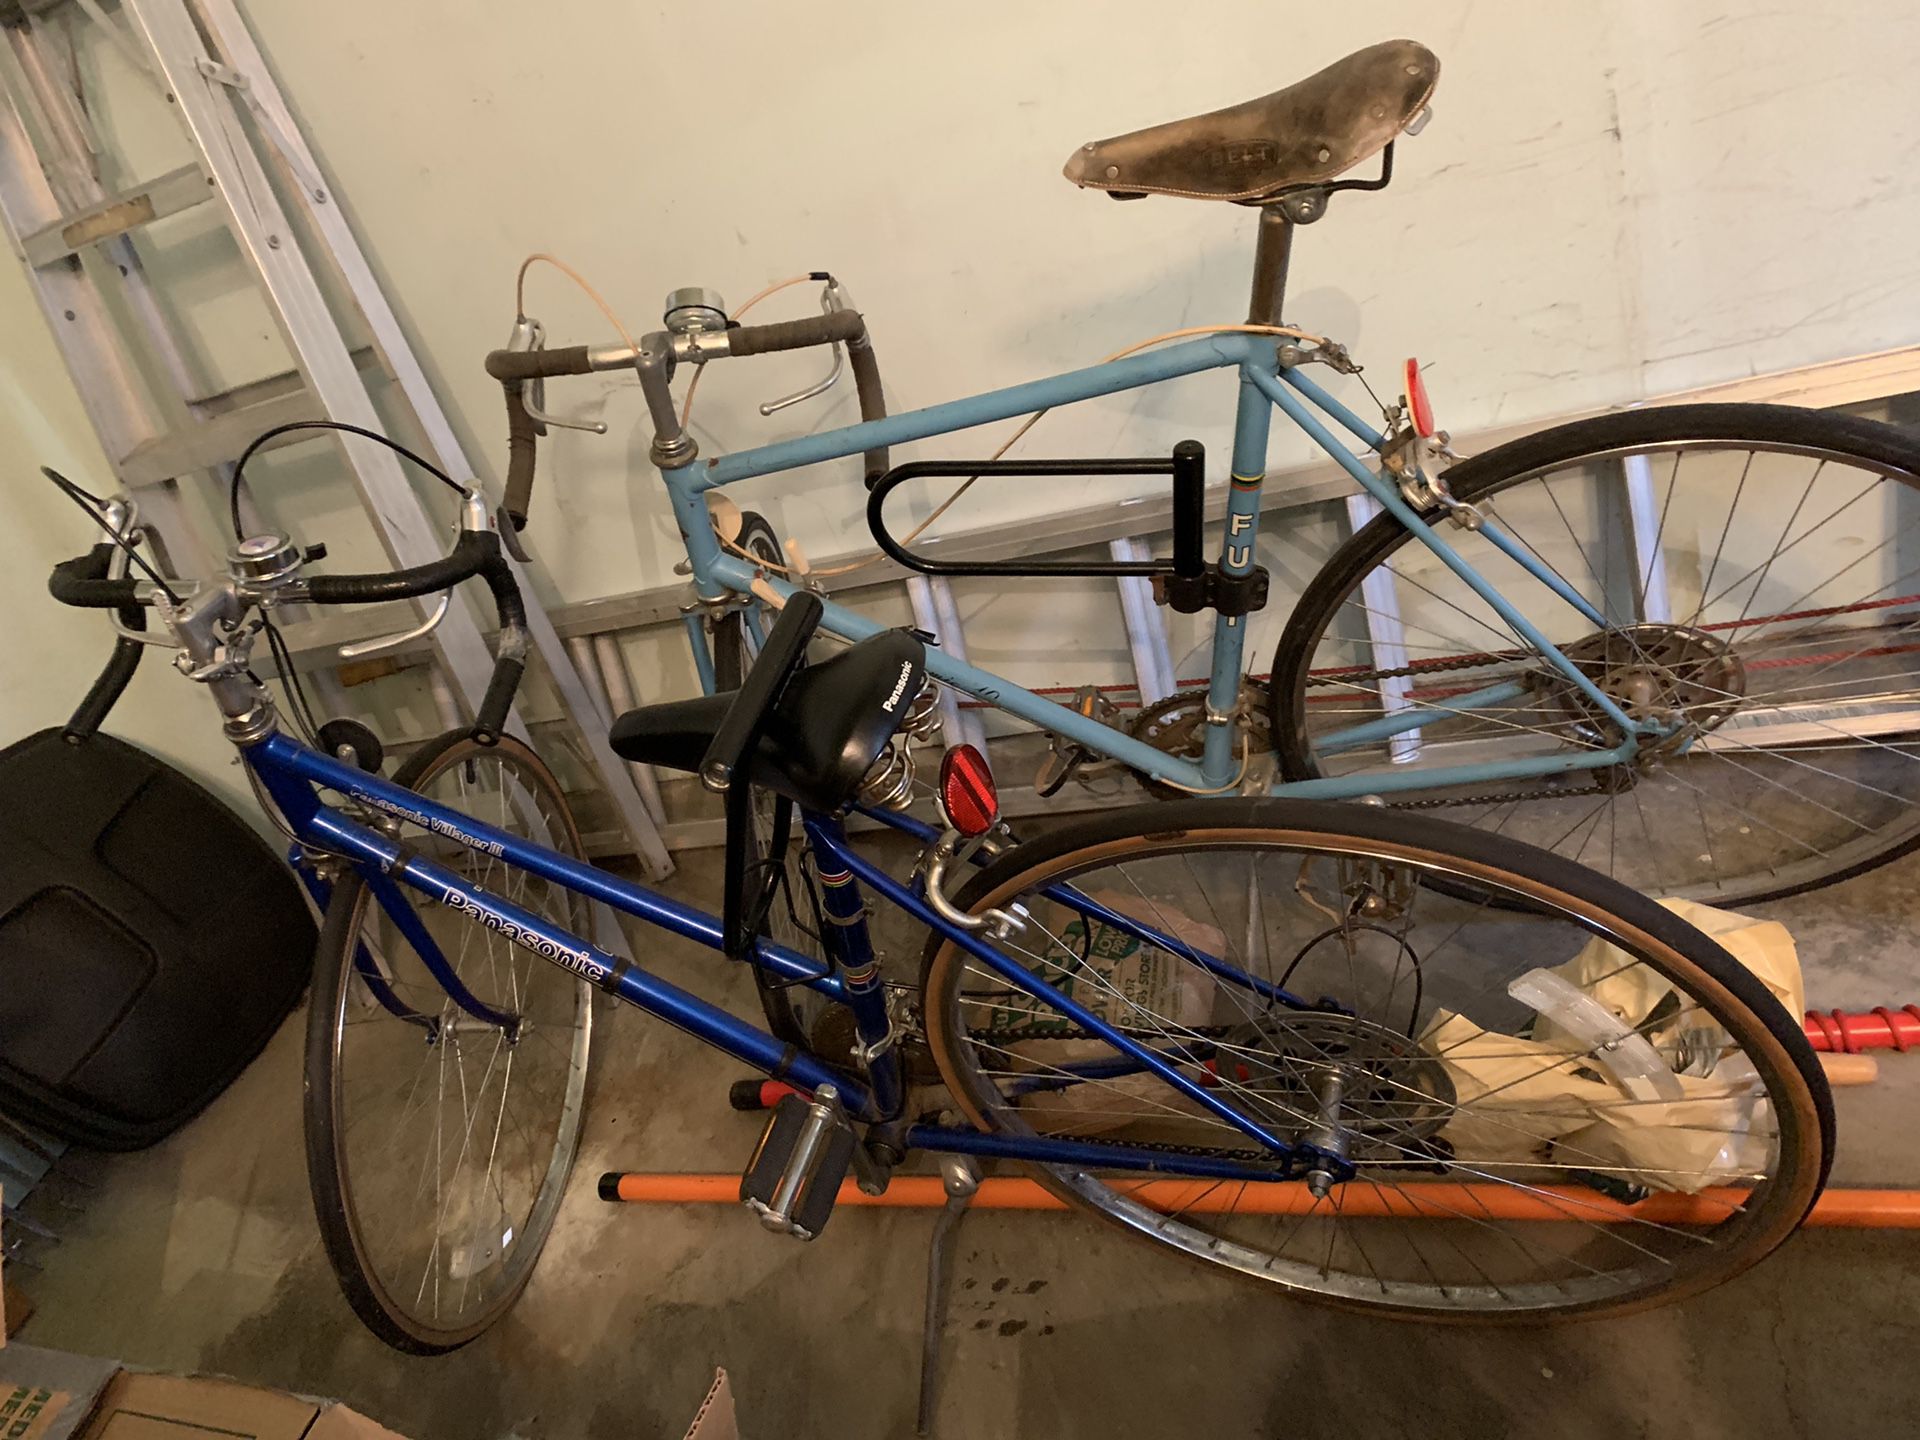 Two bikes - Fuji for man and Panasonic for woman, good condition